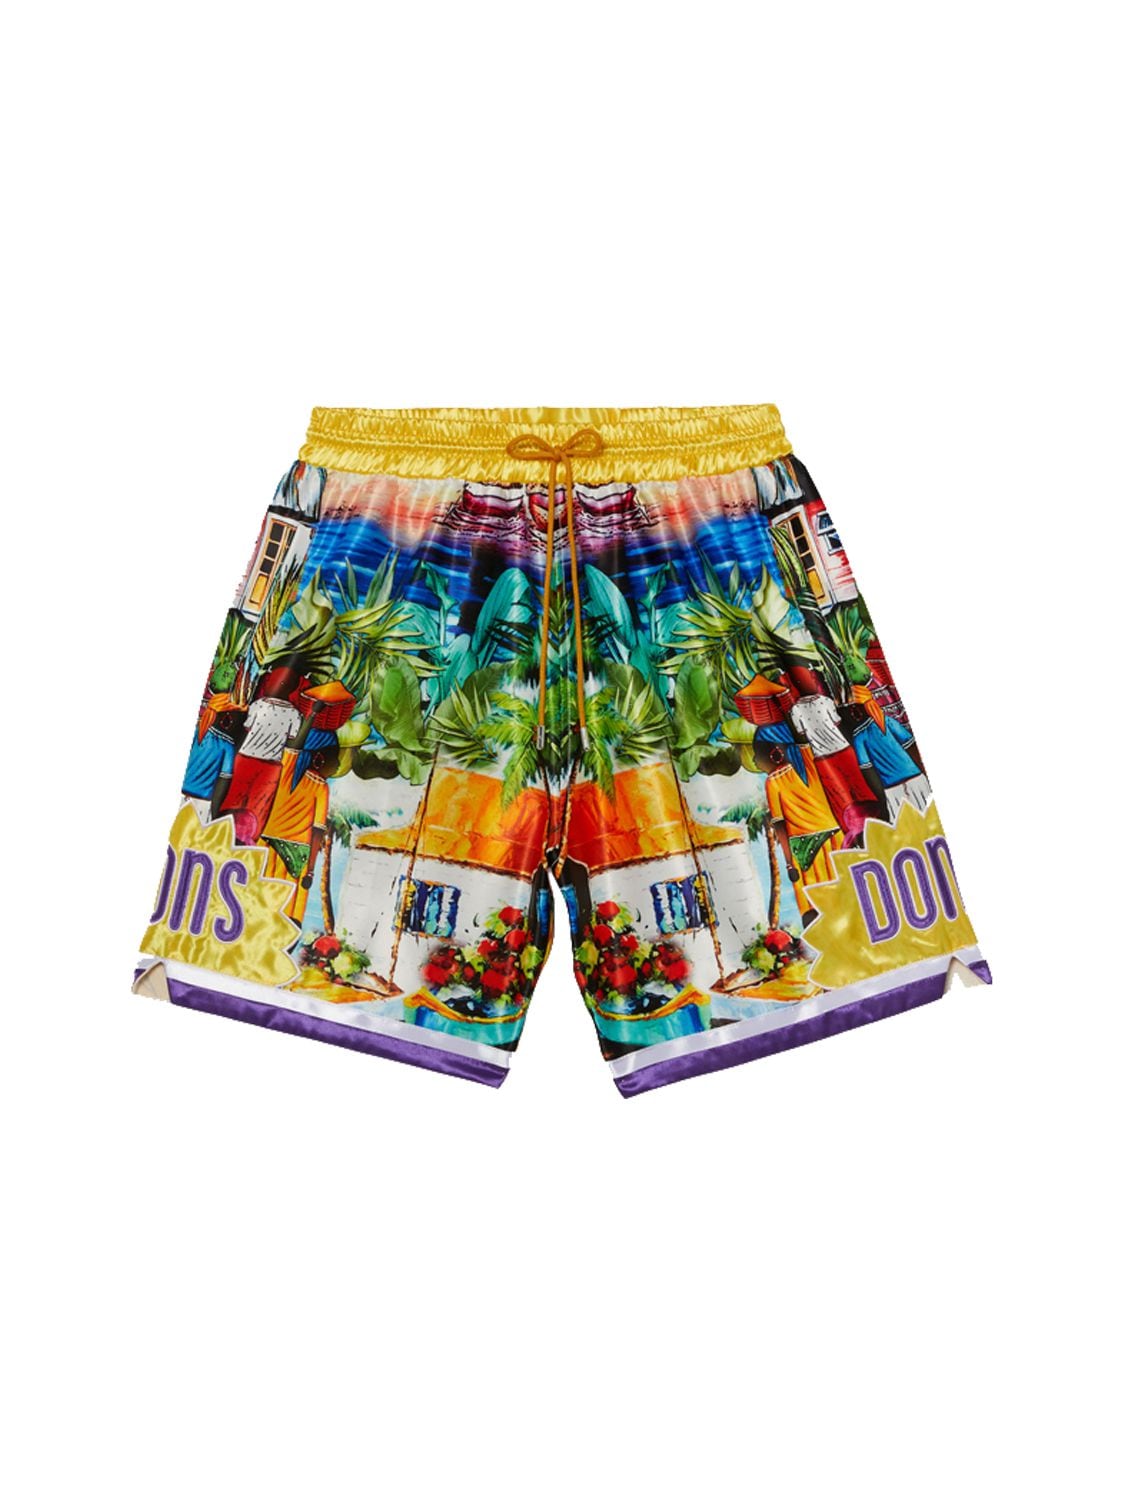 JUST DON PRINTED COTTON BLEND SWEAT SHORTS